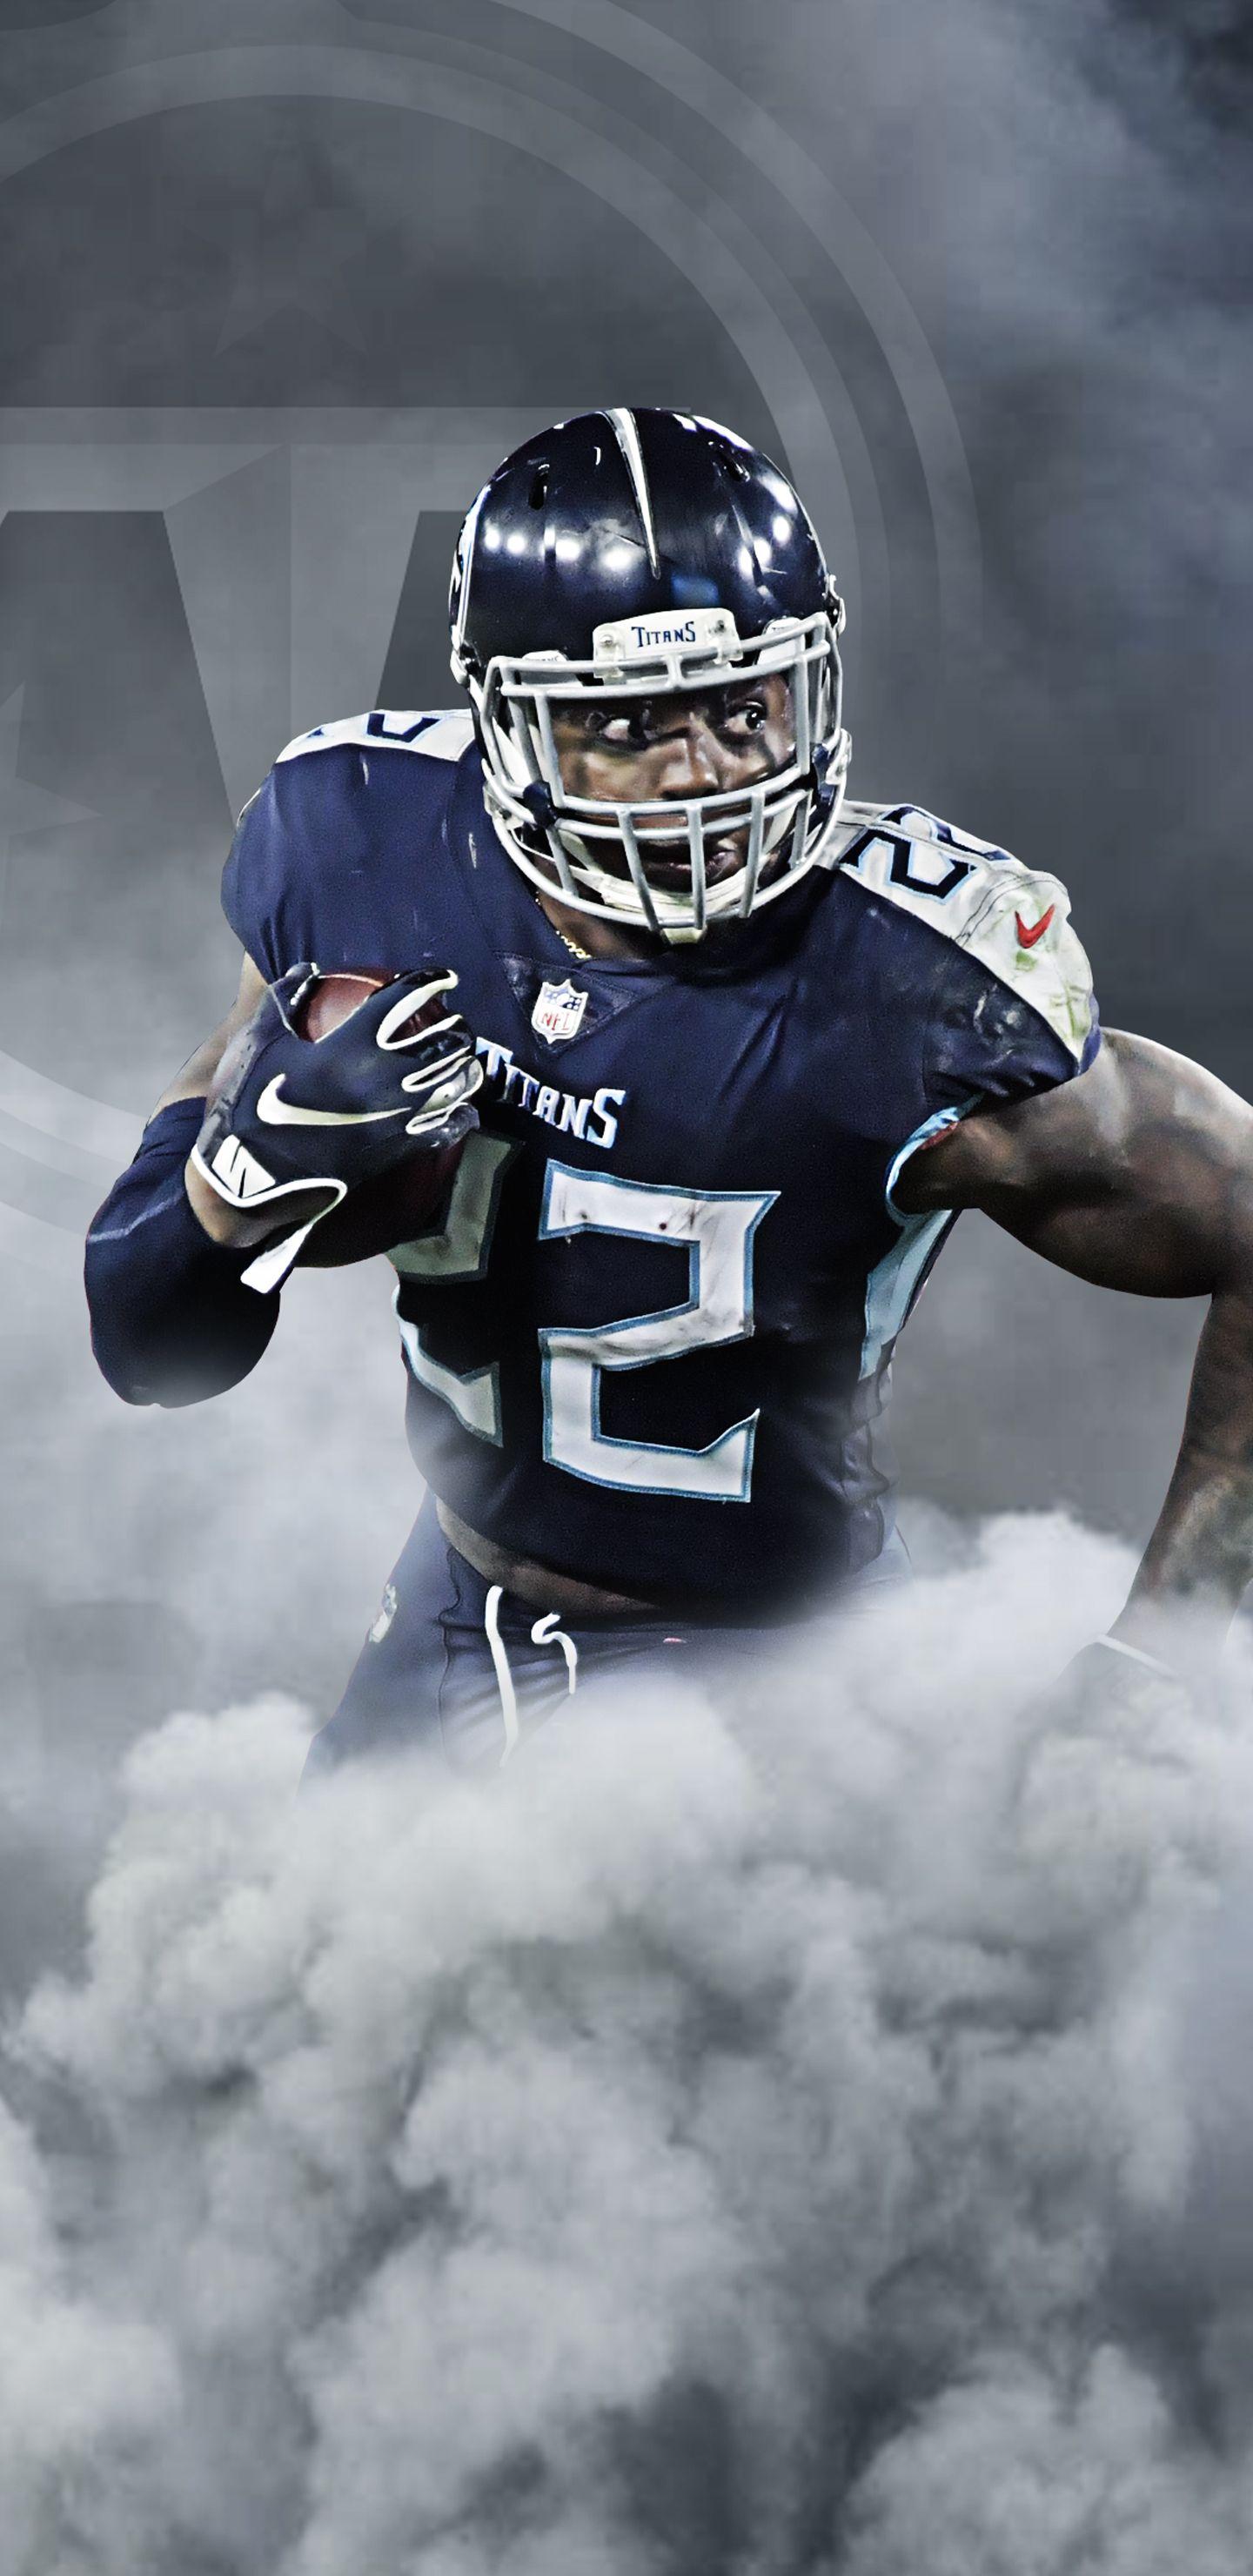 NawPic  Derrick Henry Download httpswwwnawpiccomderrickhenry9  Download Derrick Henry Wallpaper for free use for mobile and desktop  Discover more alabama demarco murray football iphone nfl Wallpaper   Facebook